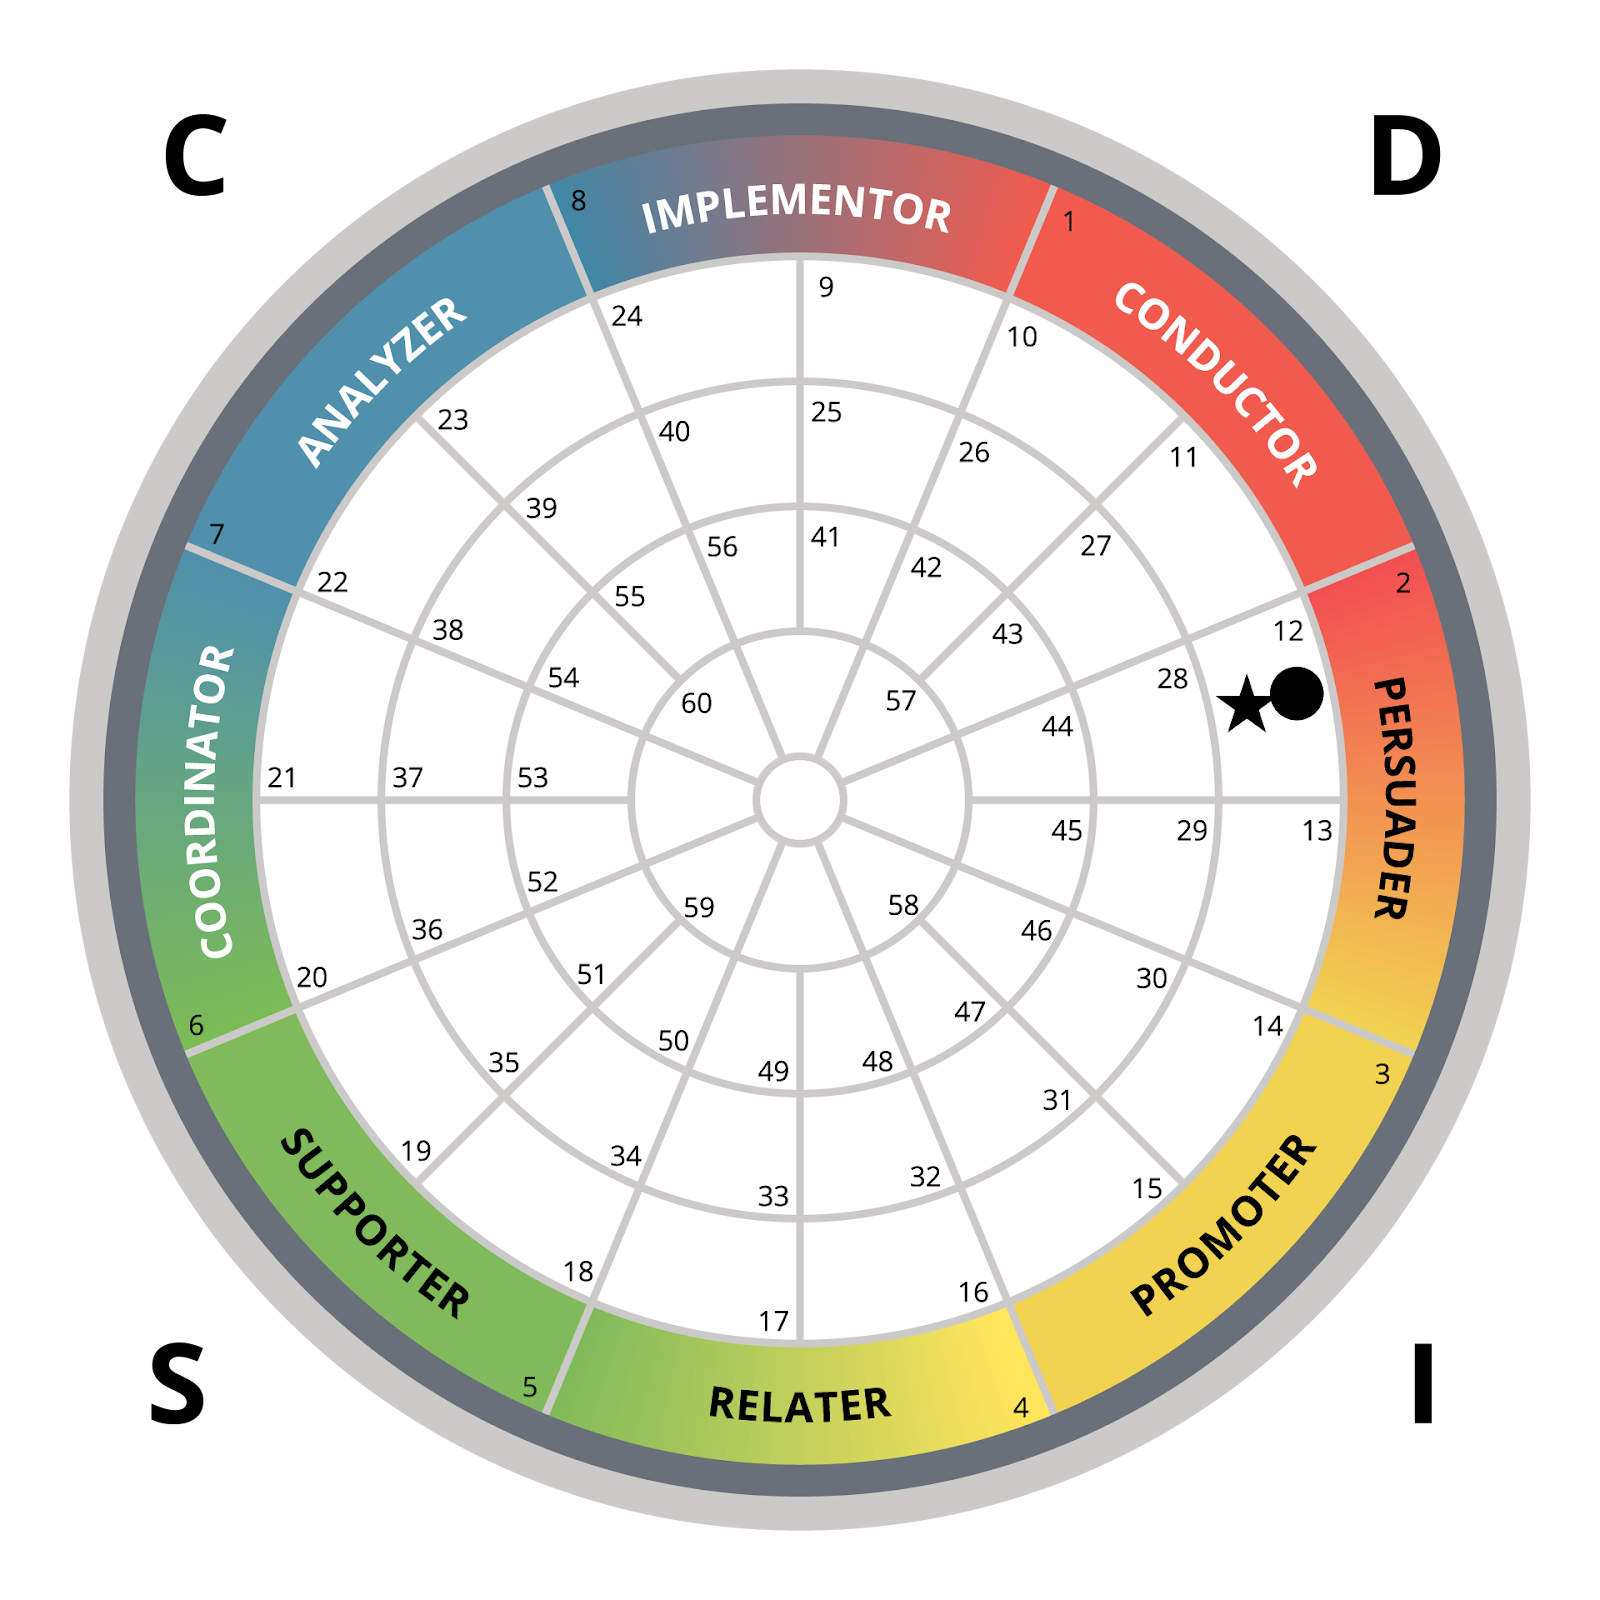 An illustration of a DISC system capable of recognizing 8 distinct personality types